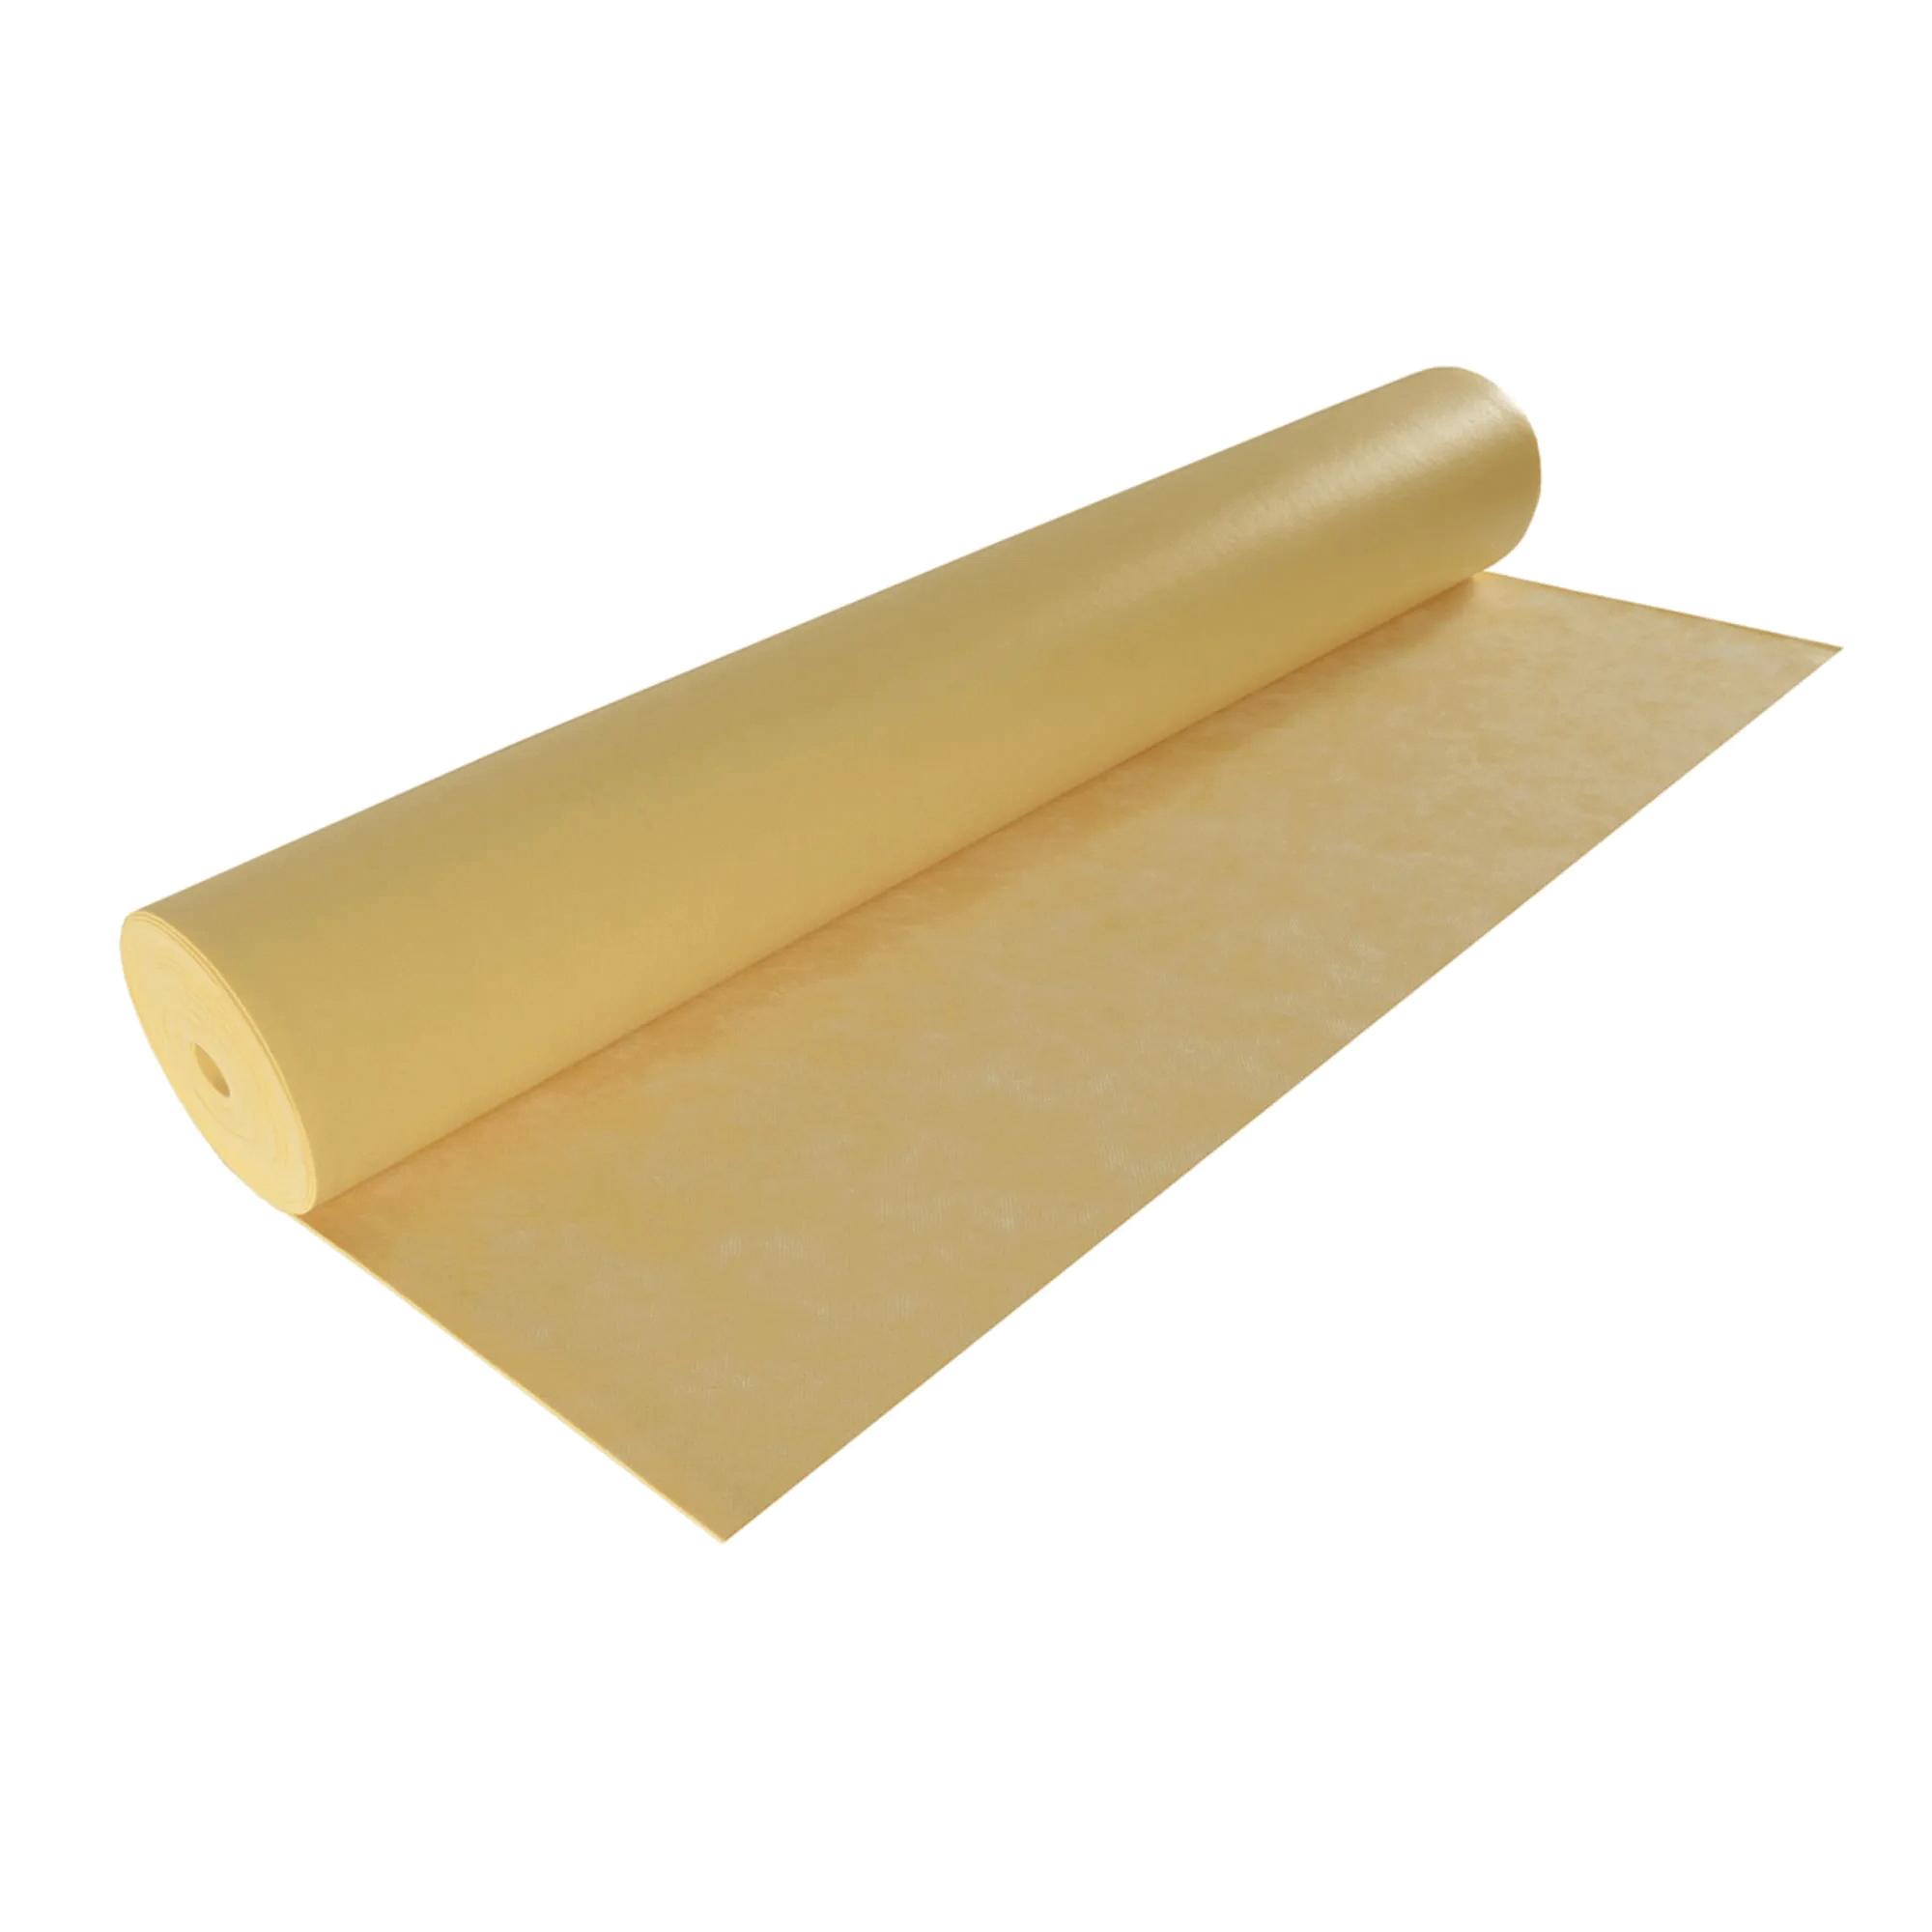 OmniChoice OC7200P Underlayment, 100 sq-ft Coverage Area, 33 ft 4 in L, 3 ft W